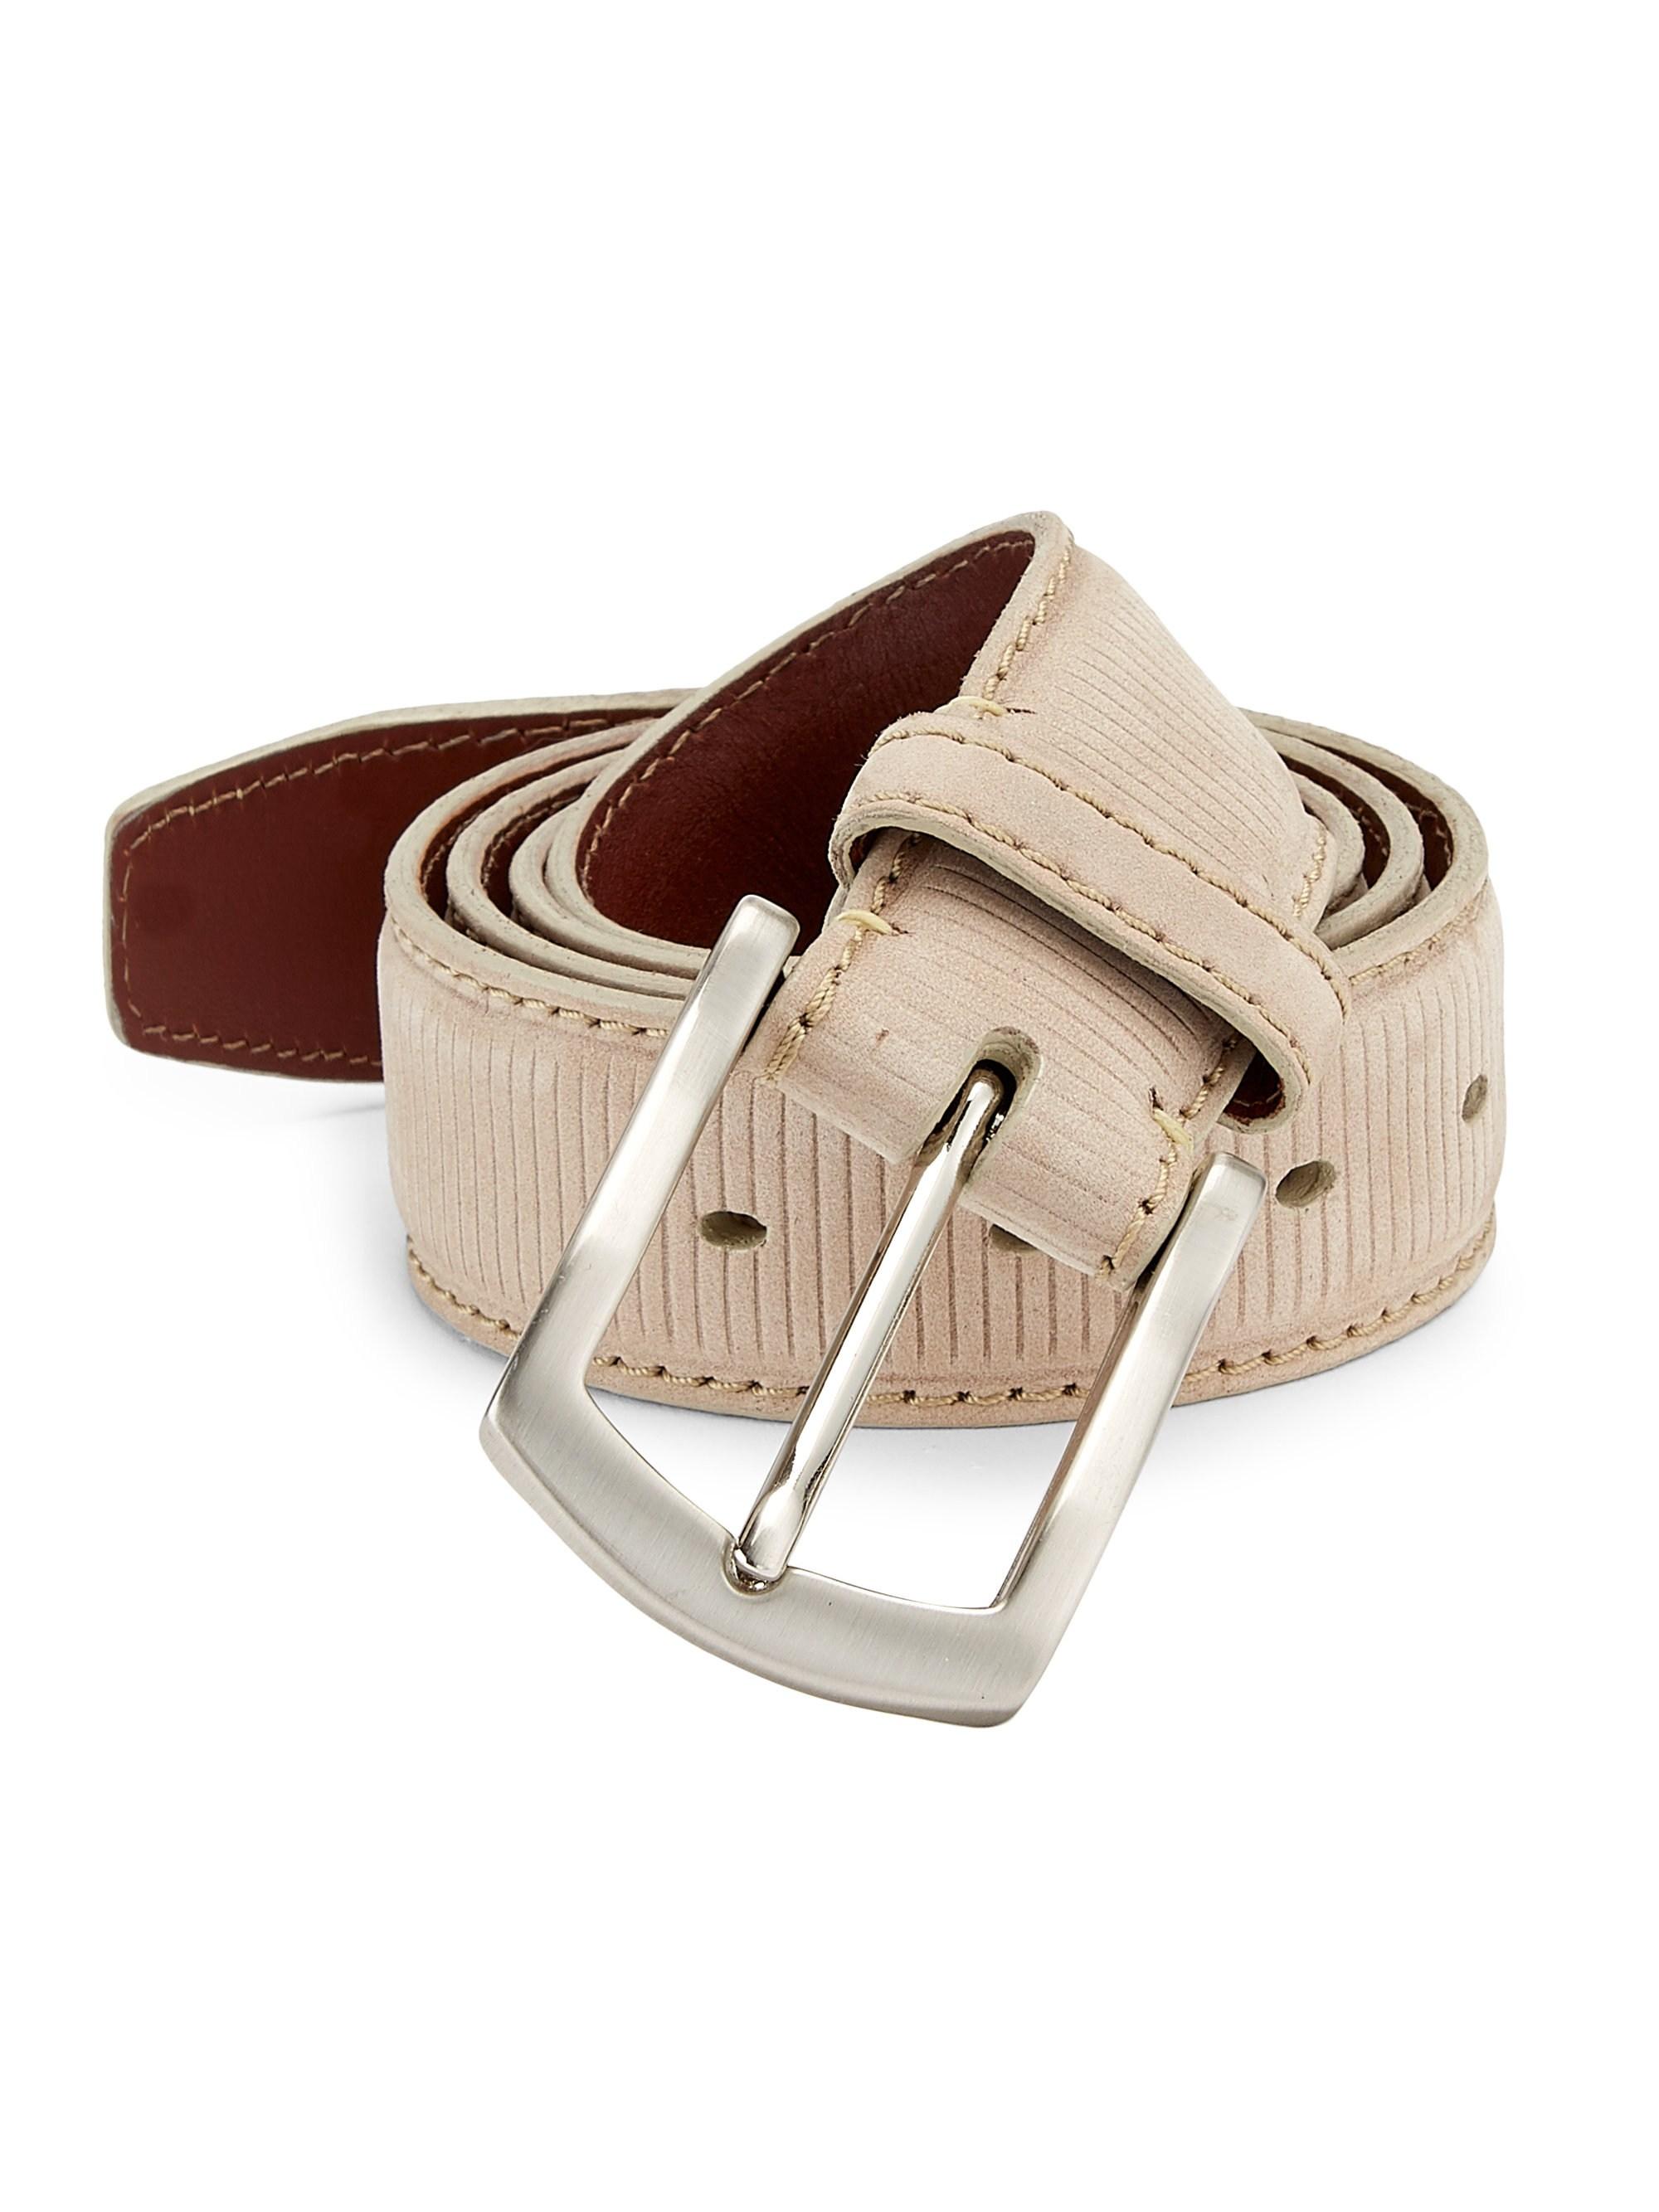 Saks Fifth Avenue Collection Ribbed Suede Belt in Natural for Men - Lyst